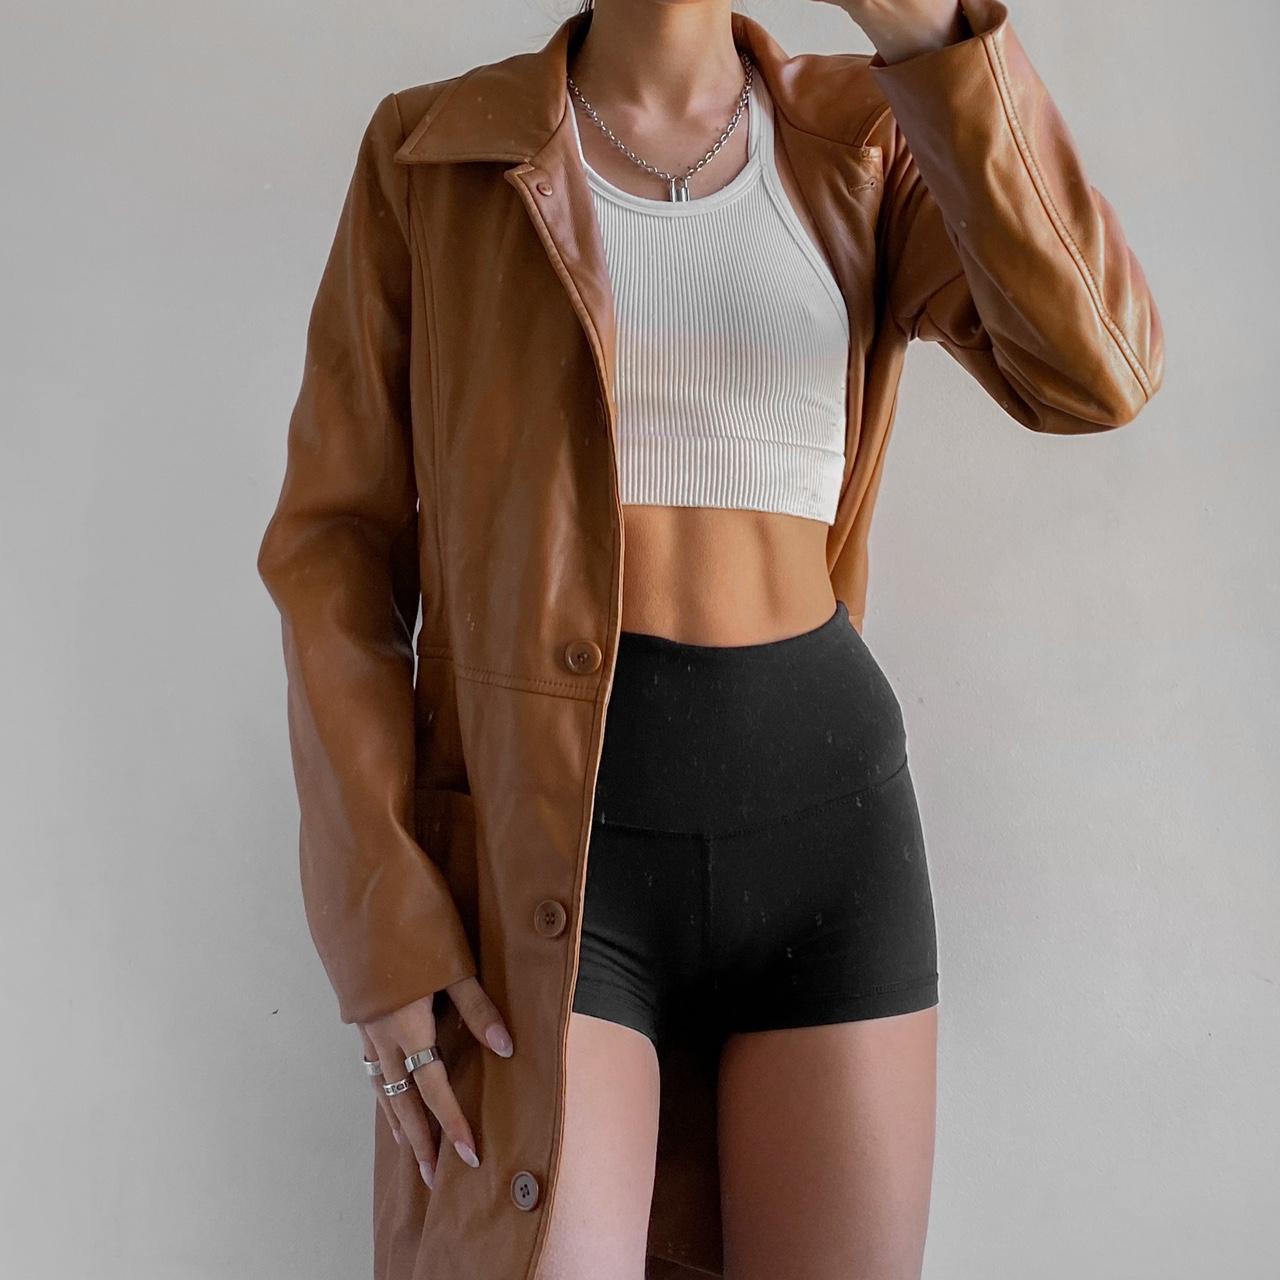 Urban Outfitters Women's Brown and Tan Coat